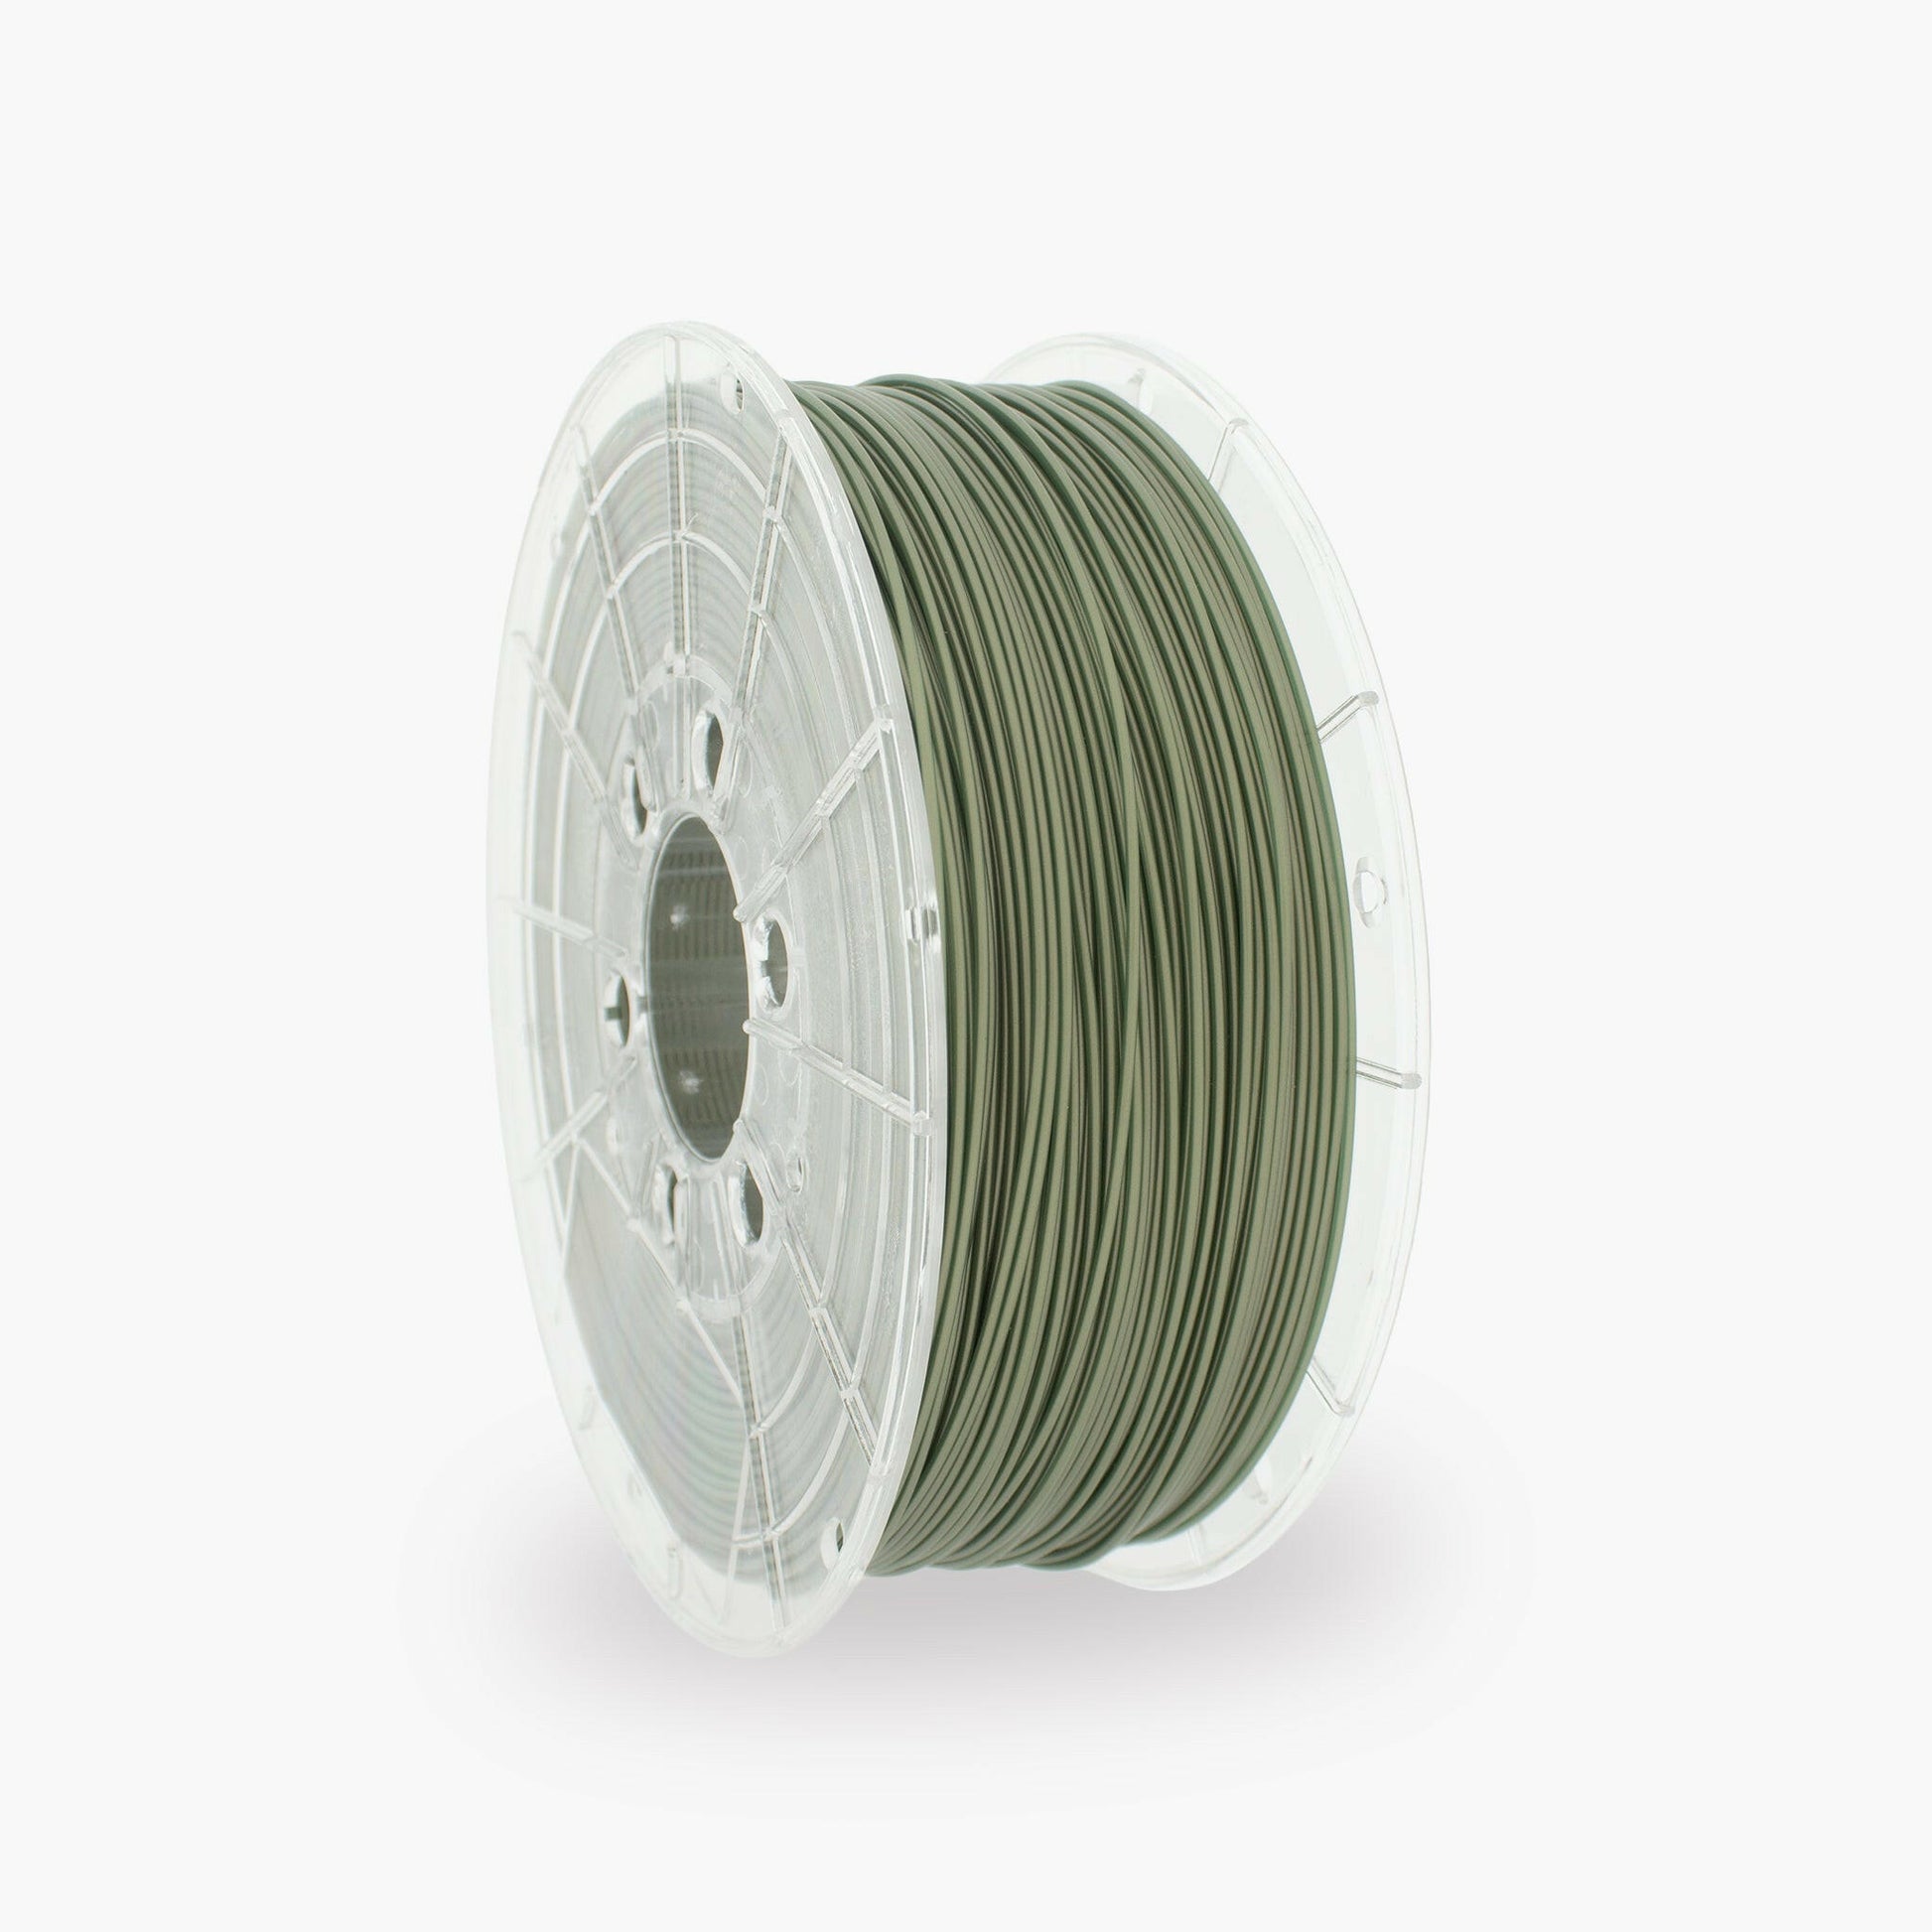 Brass PETG 3D Printer Filament with a diameter of 1.75mm on a 1KG Spool.